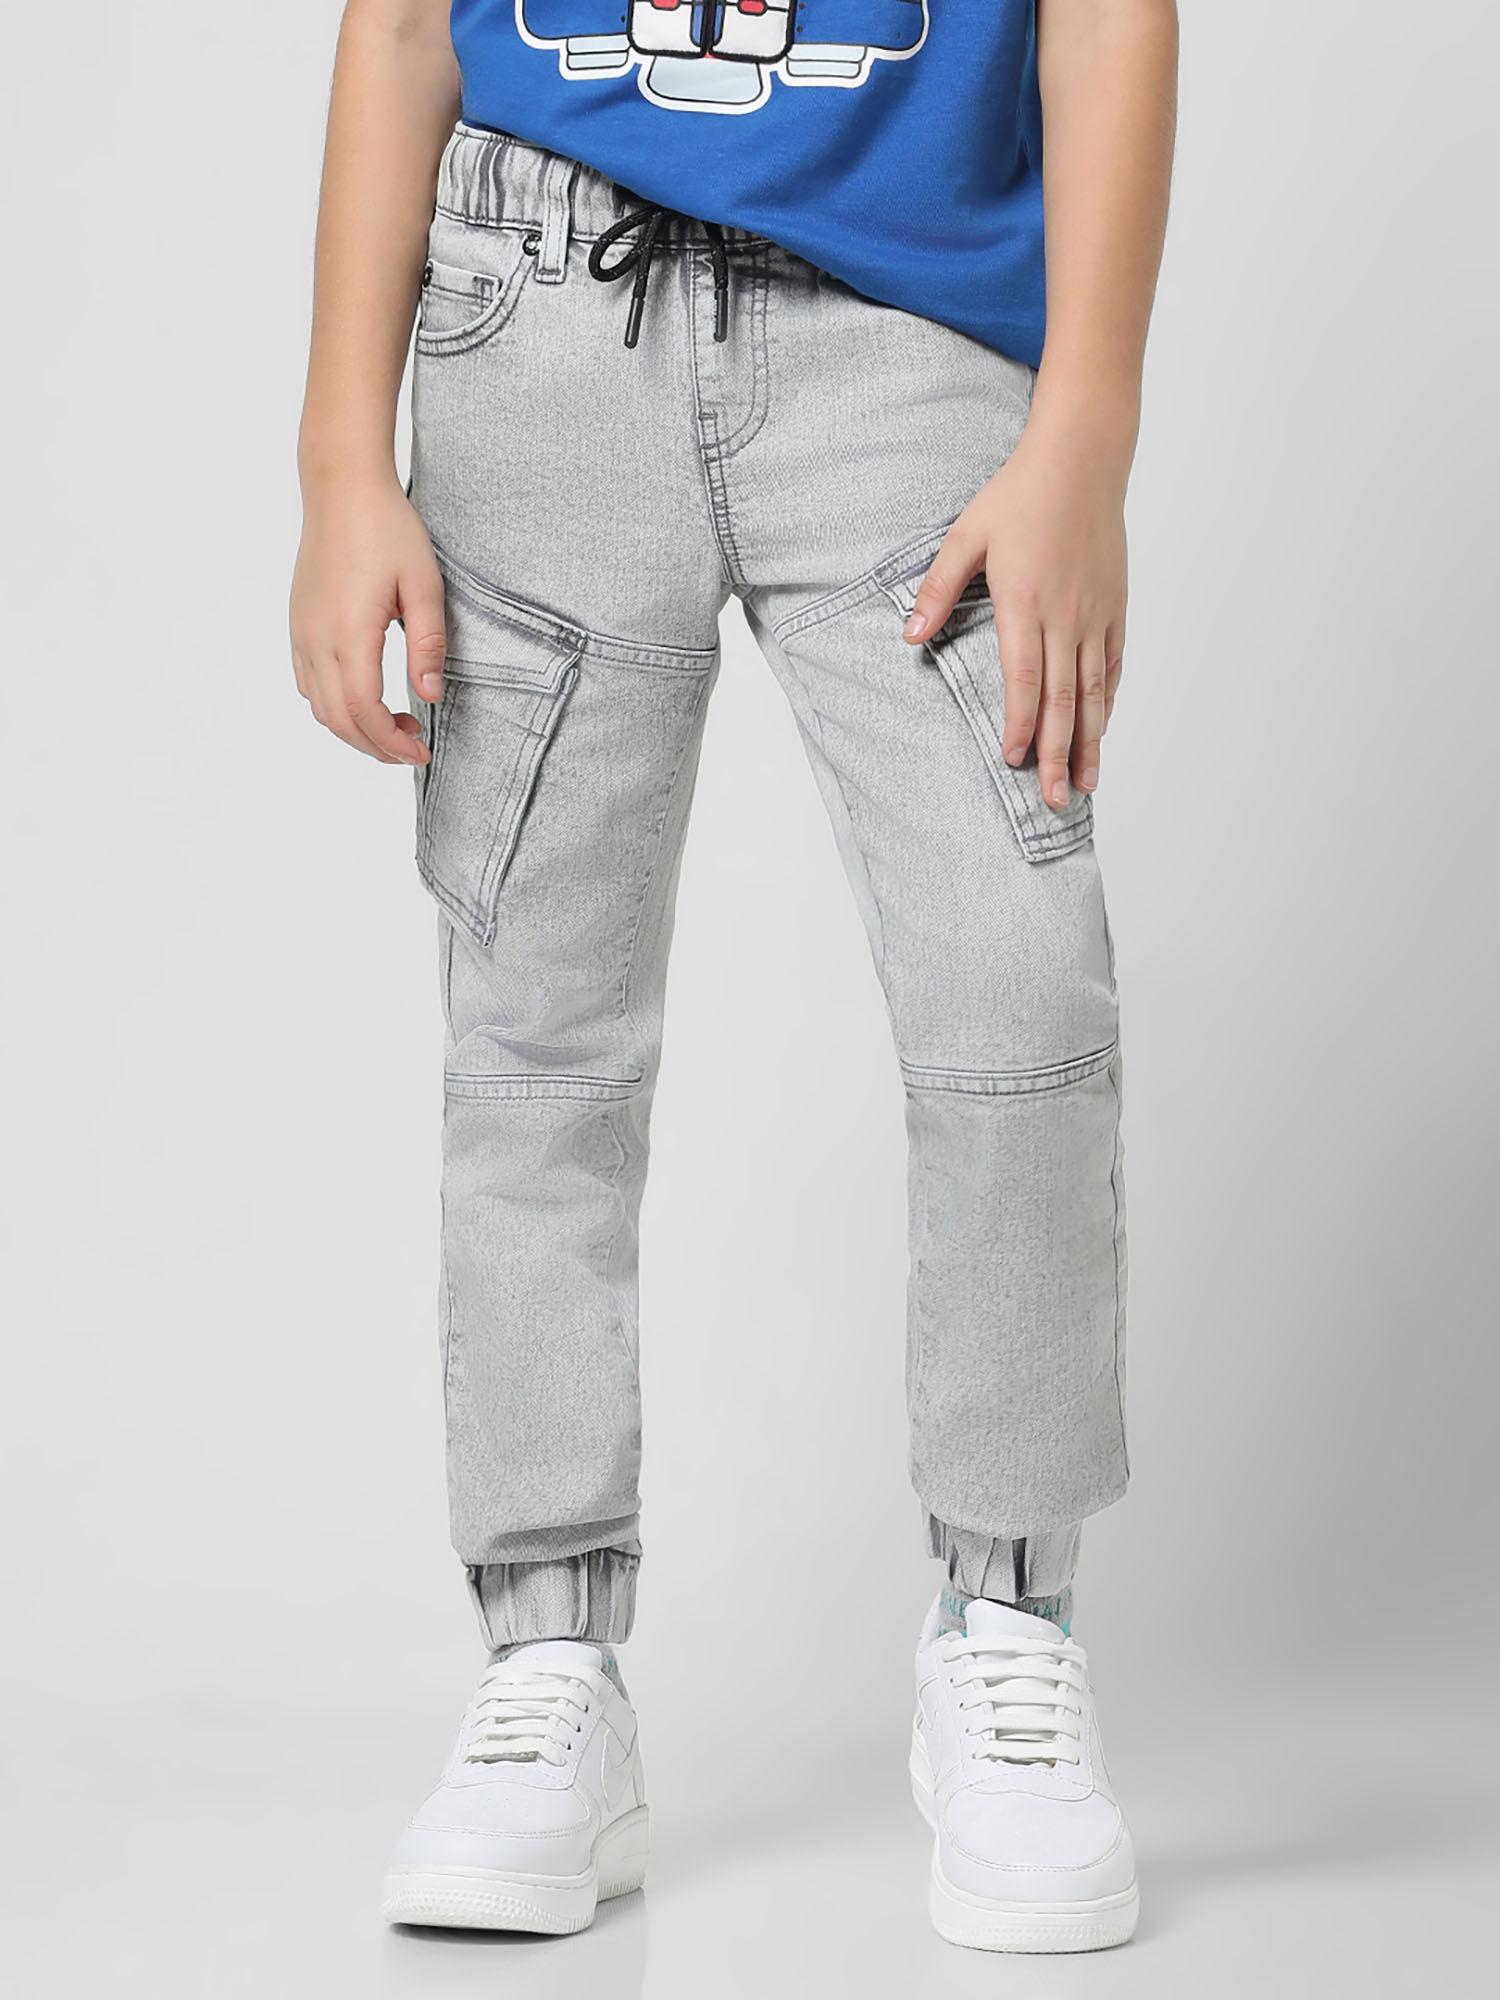 boys solid grey jeans